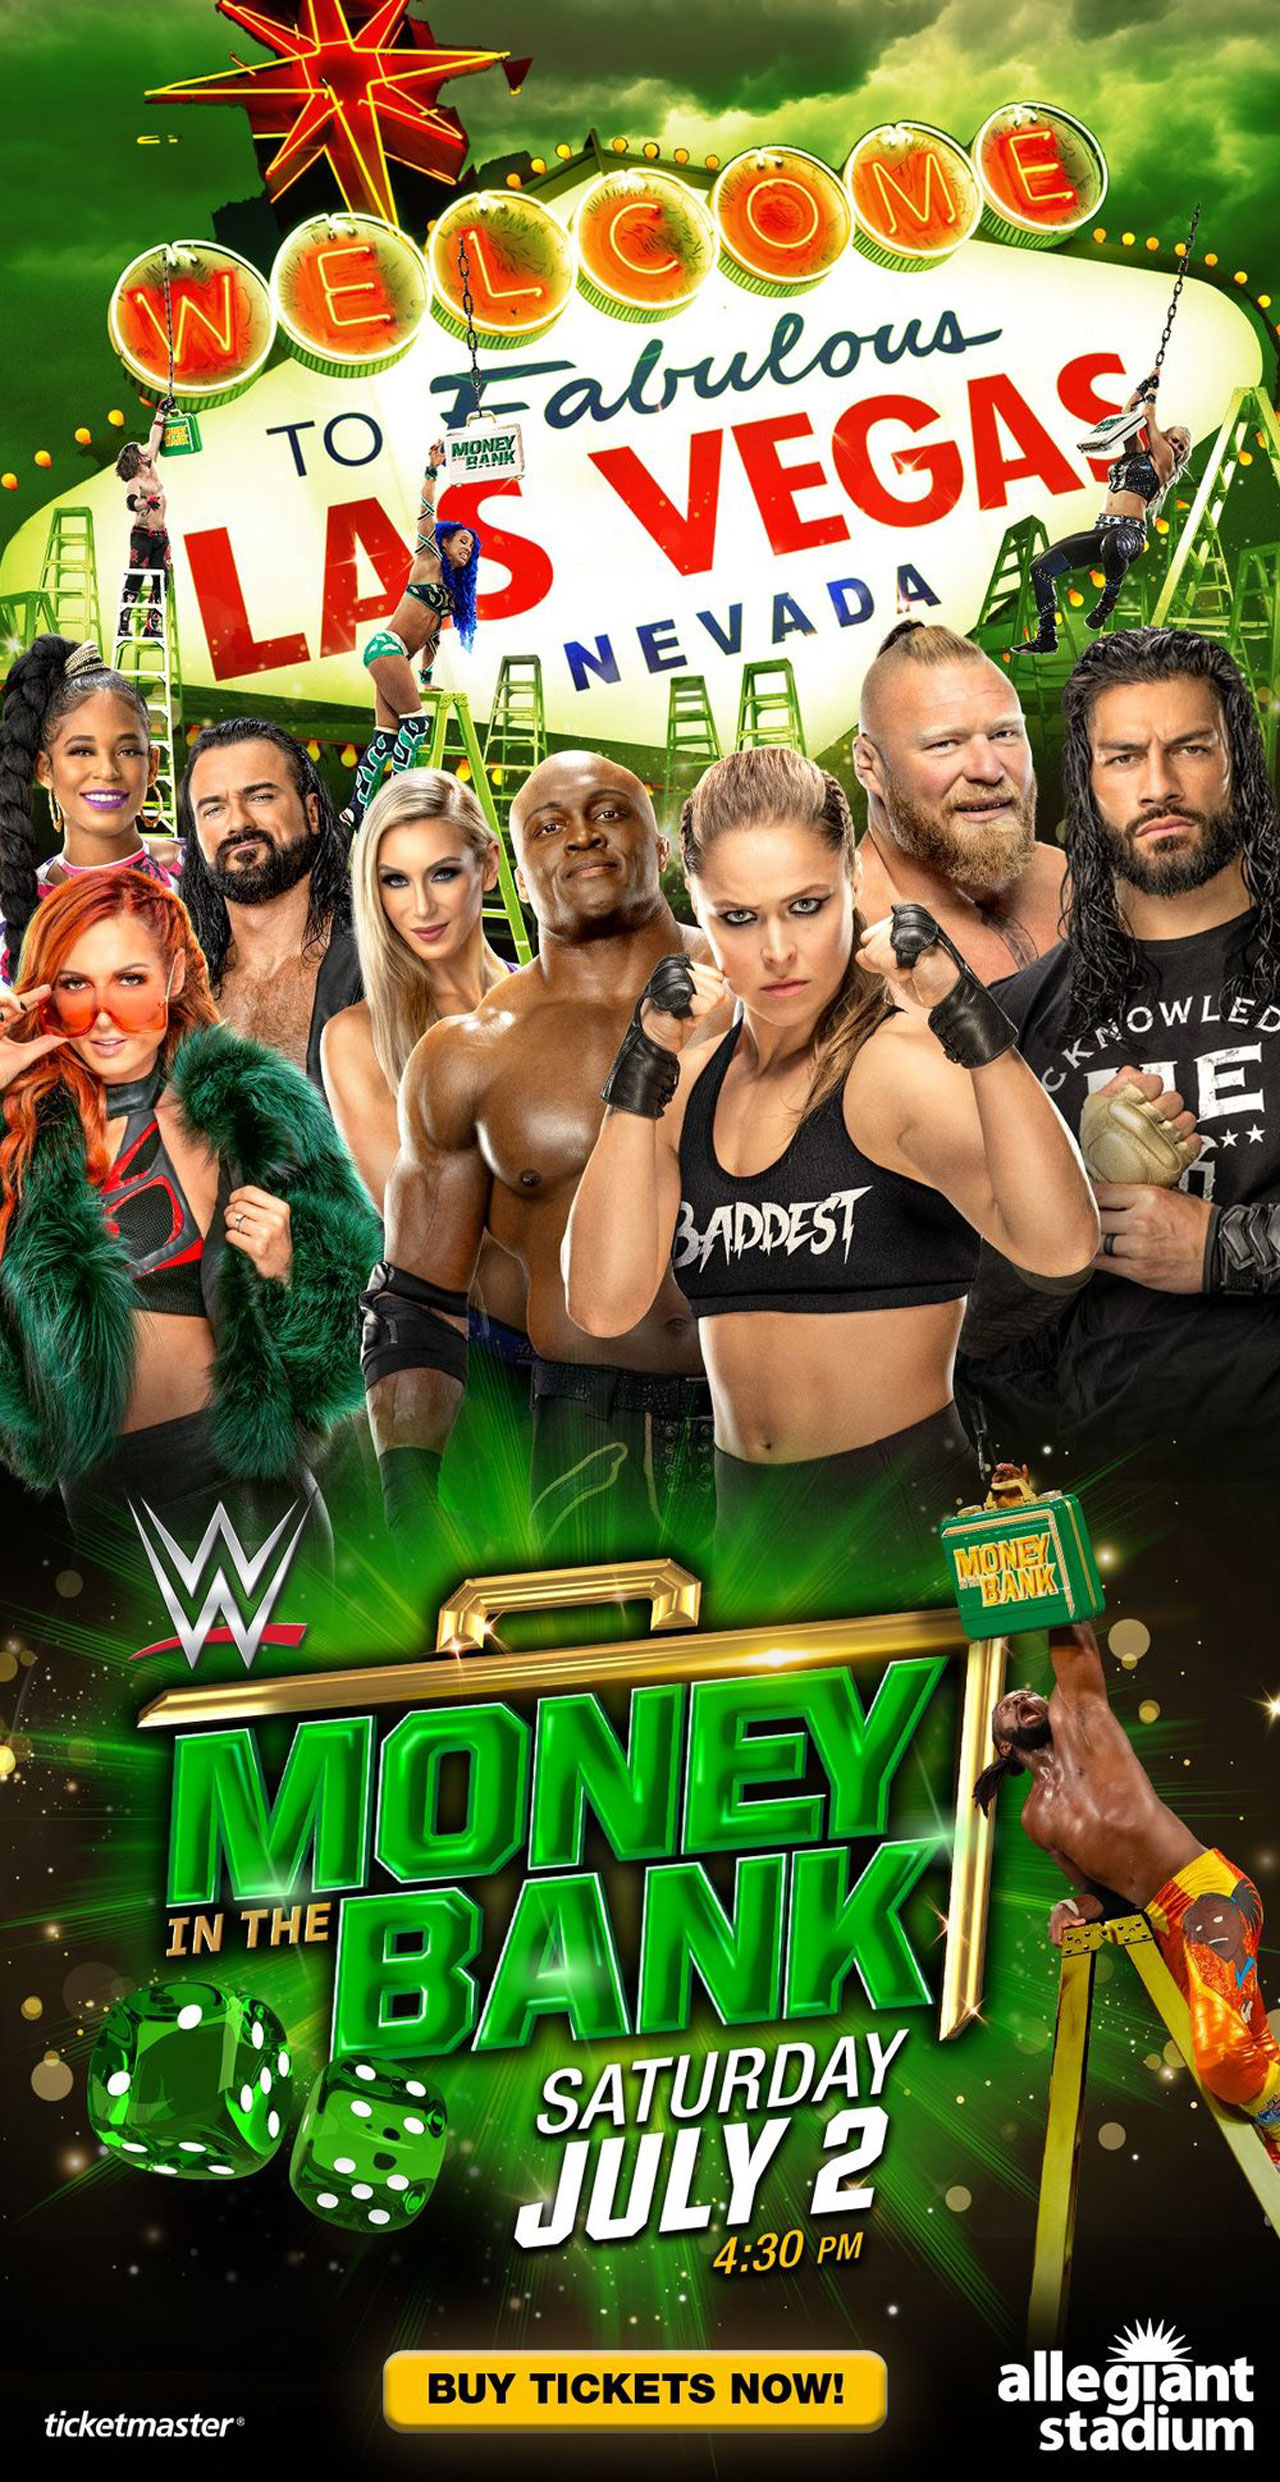 Original Money In The Bank poster with Ronda Rousey, Roman Reigns, Brock Lesnar, Sasha Banks and more.